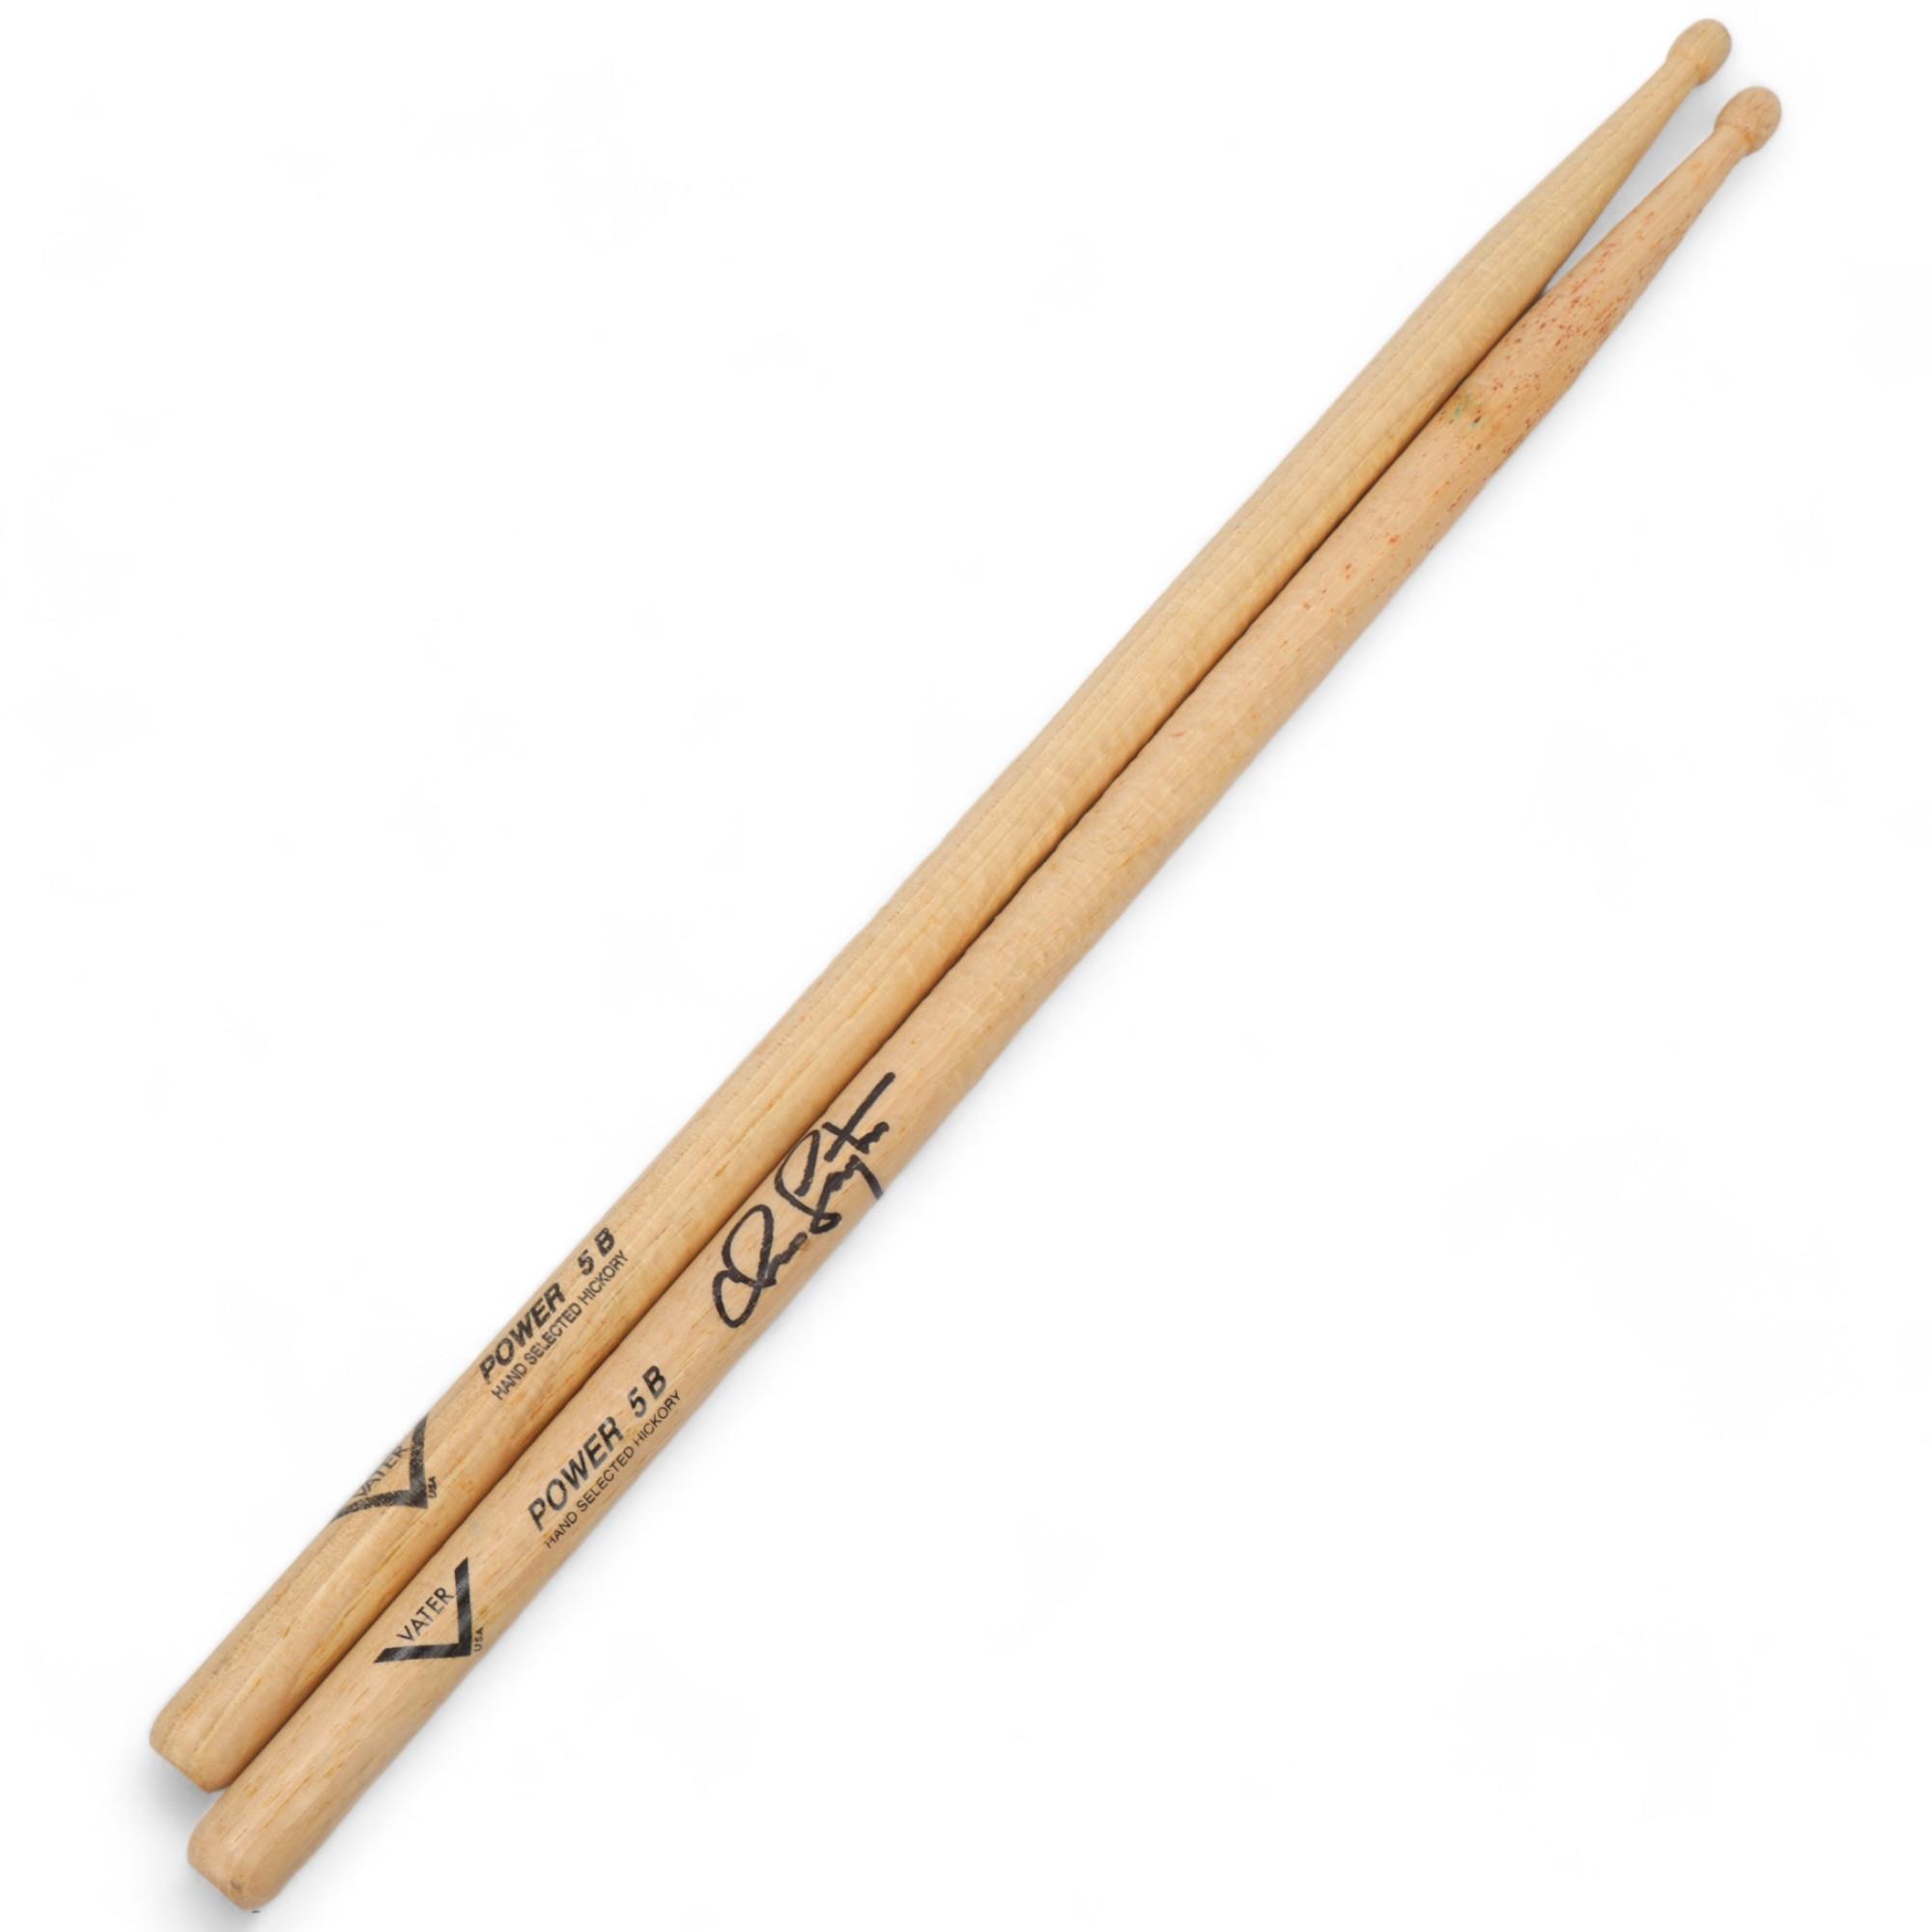 Two USED 'VATER - POWERLINE 5B' Hickory DRUMSTICKS belonging to MITCH MITCHELL.